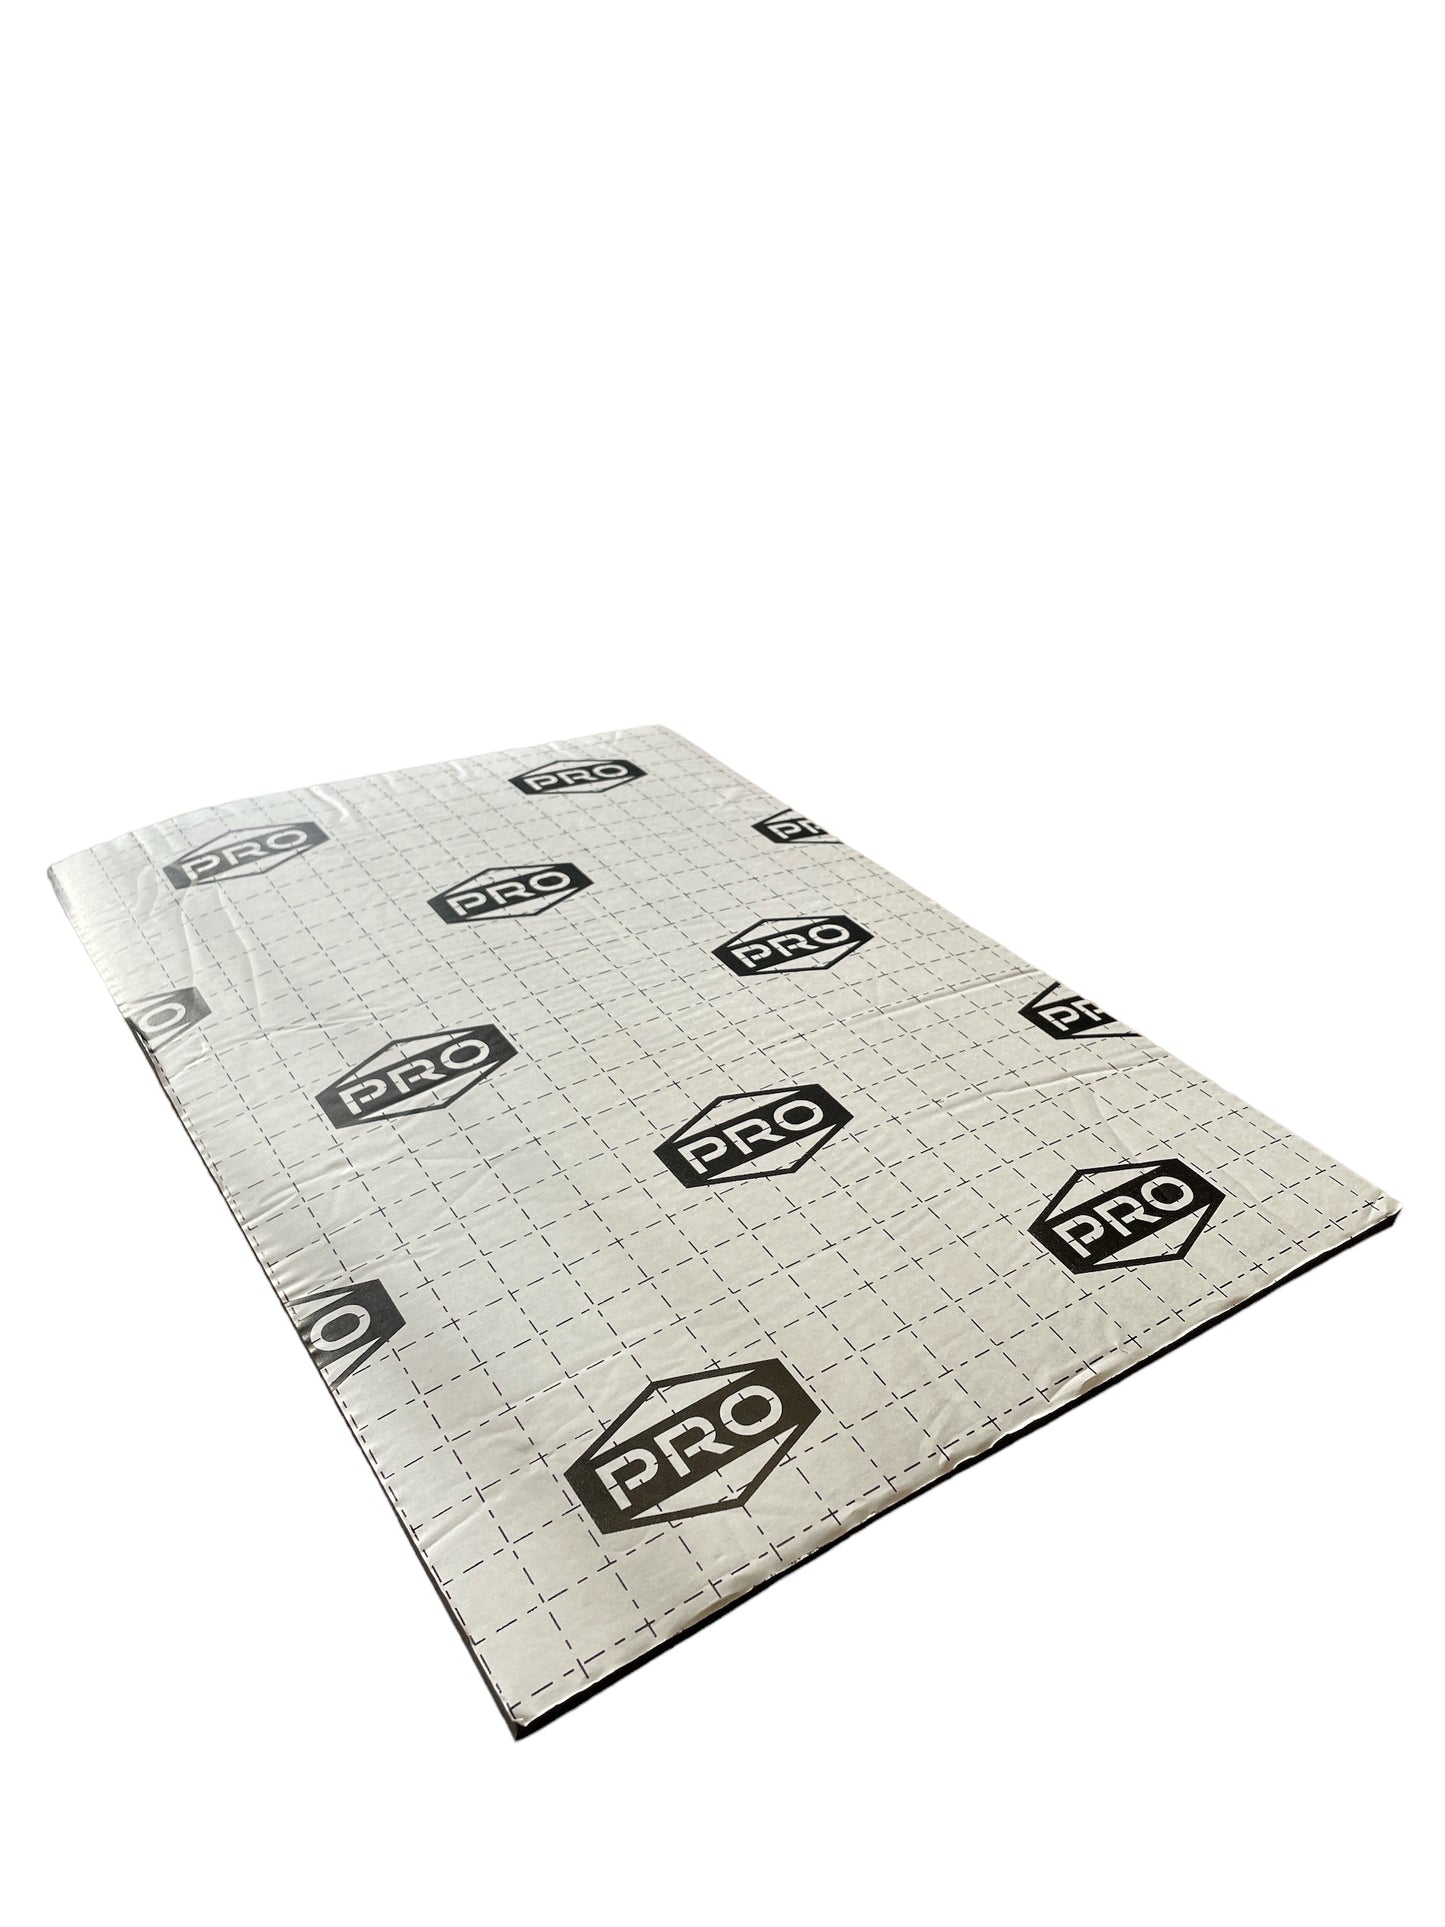 PRO® Thermo Rubber Foam 6mm Sound Absorbing Thermal Deadn Mat 35cm x 50cm 20 sheets 3.5sqm